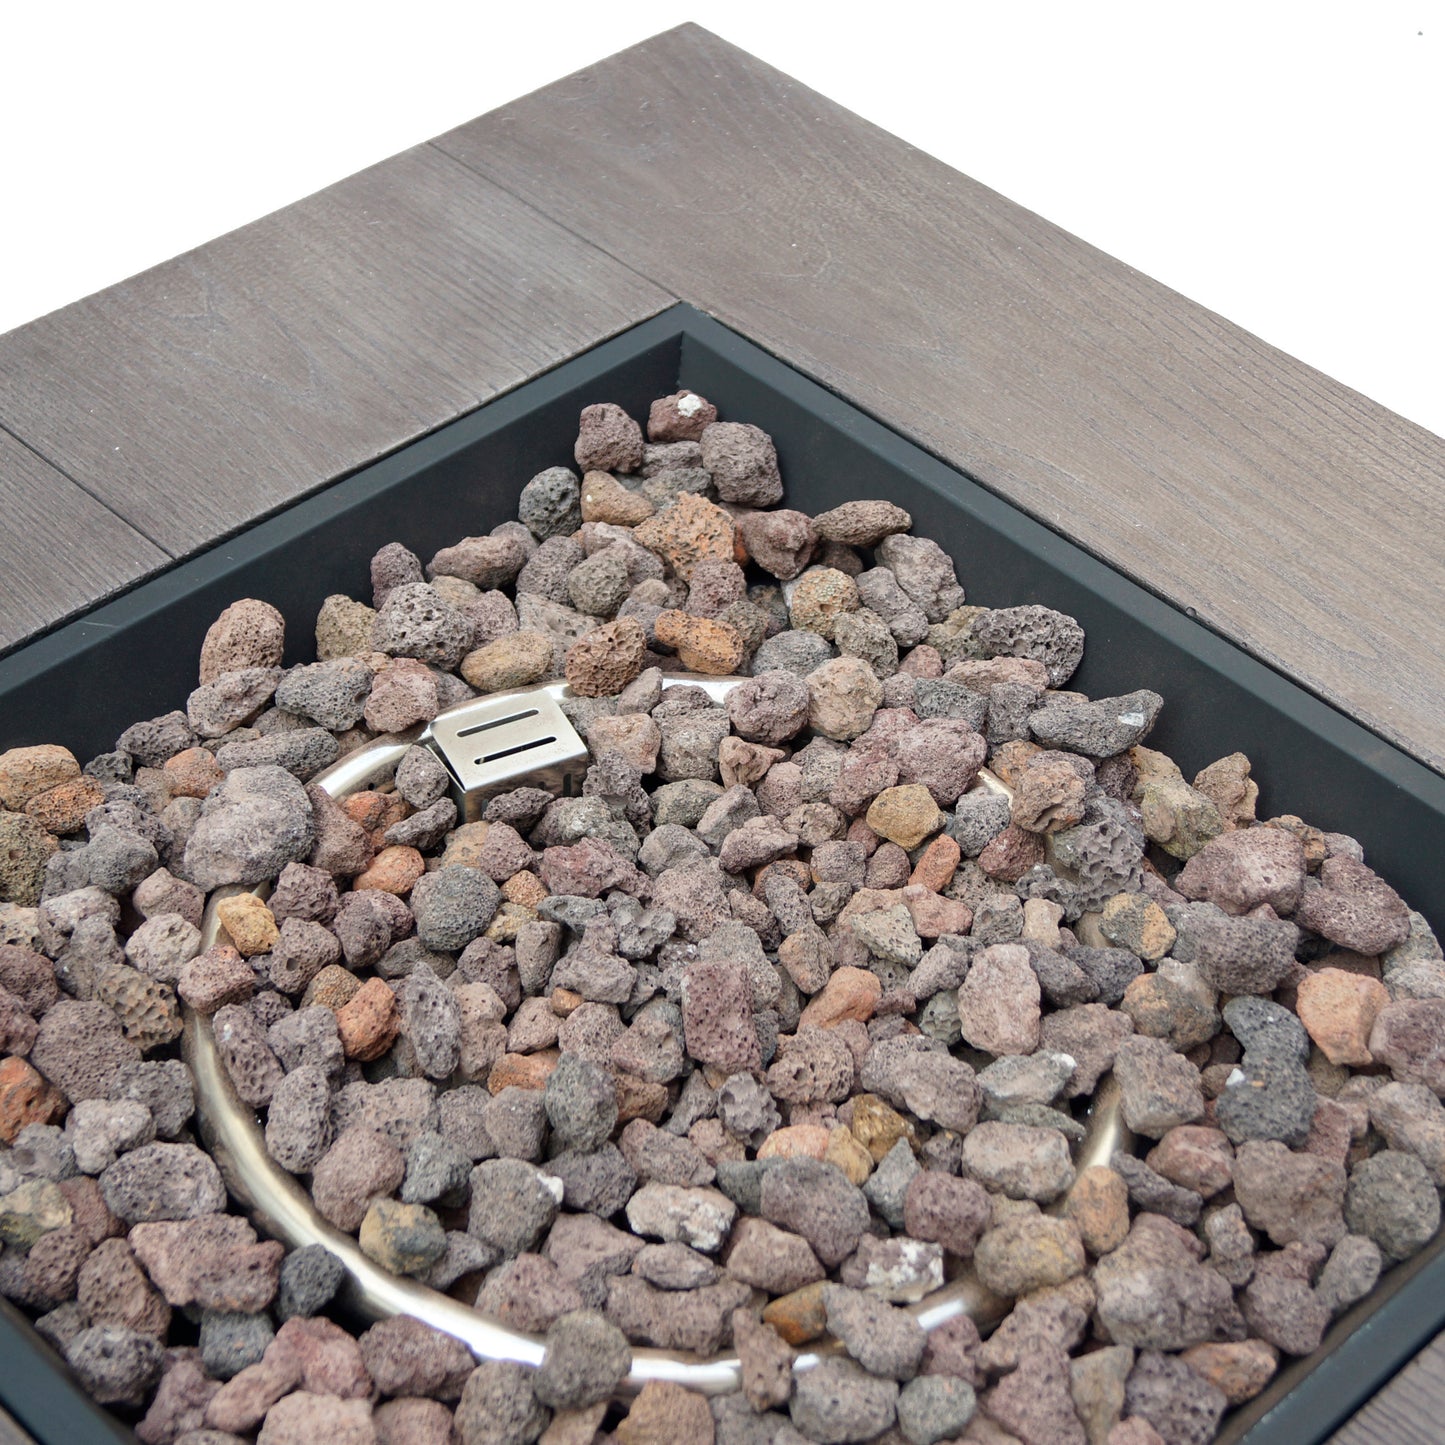 Ellesmere Outdoor Wood Patterned Square Gas Fire Pit